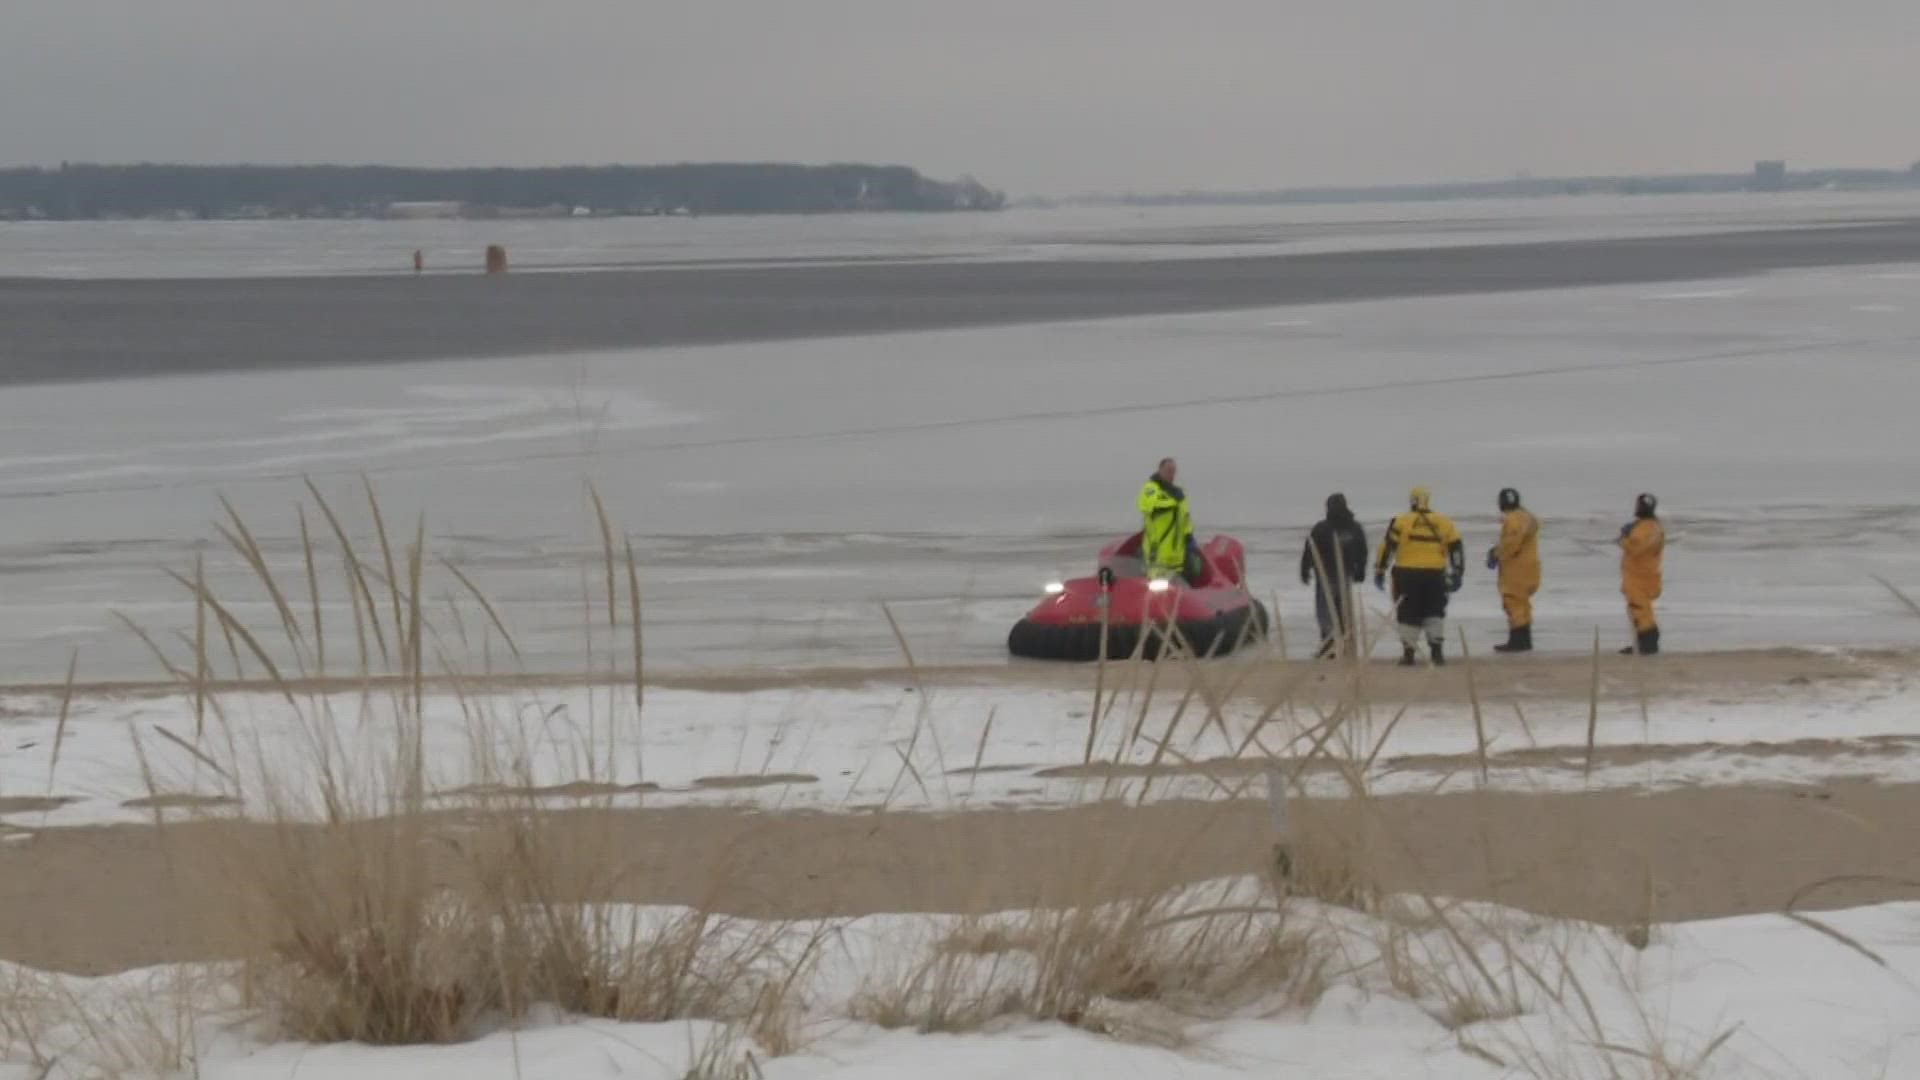 Rescue crews used a hovercraft to get to an ice fisherman on a section of ice that broke away.